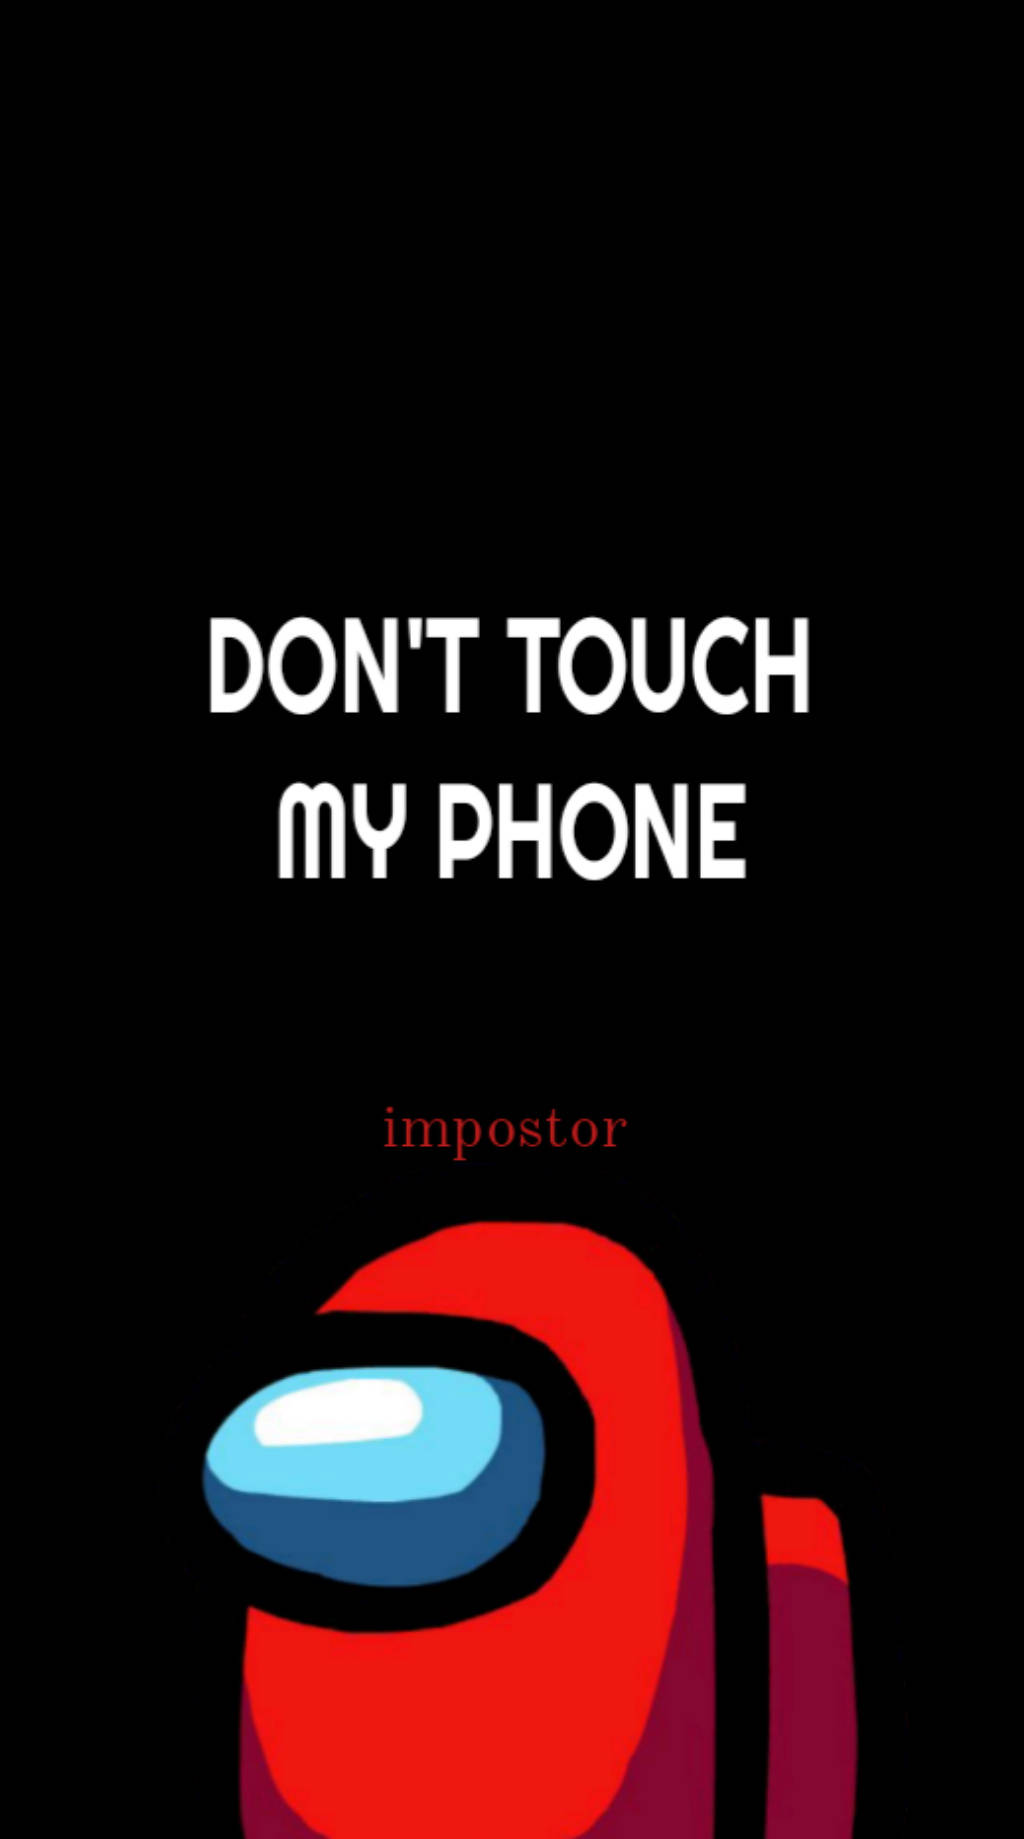 Cool Among Us Don't Touch Phone Wallpaper